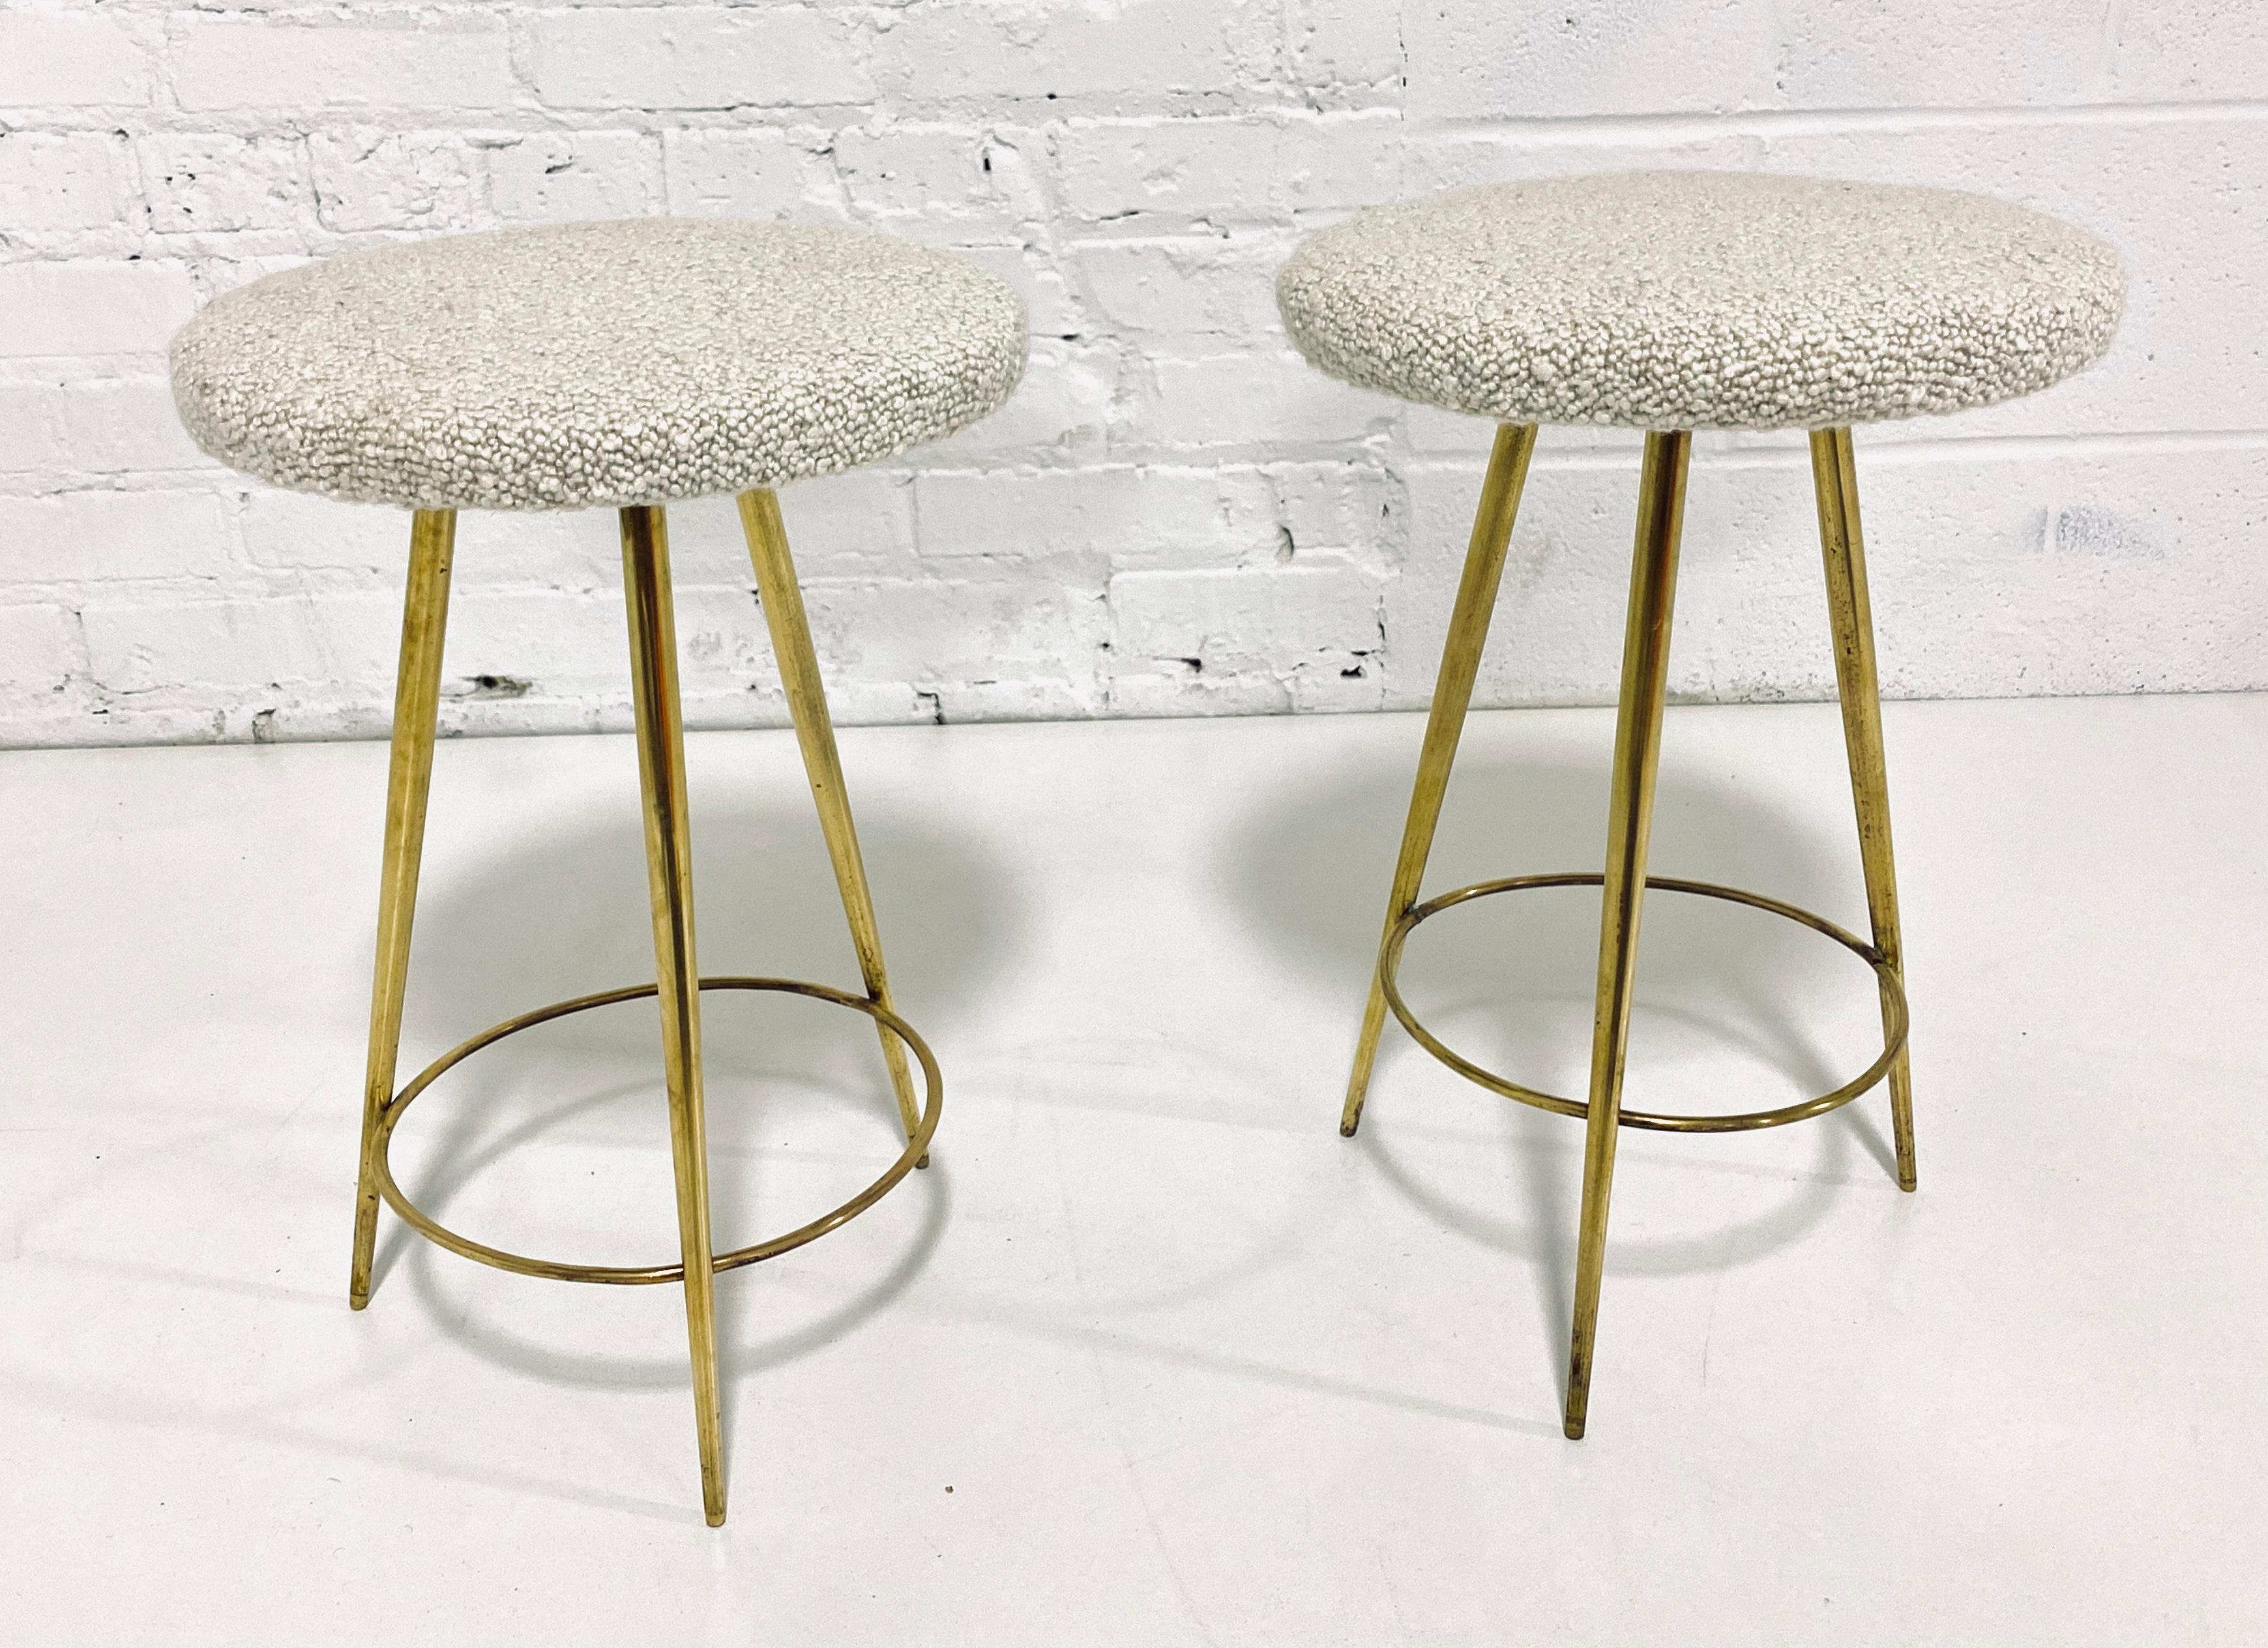 Chic low brass stools with cream boucle upholstery, Italian, circa 1950.